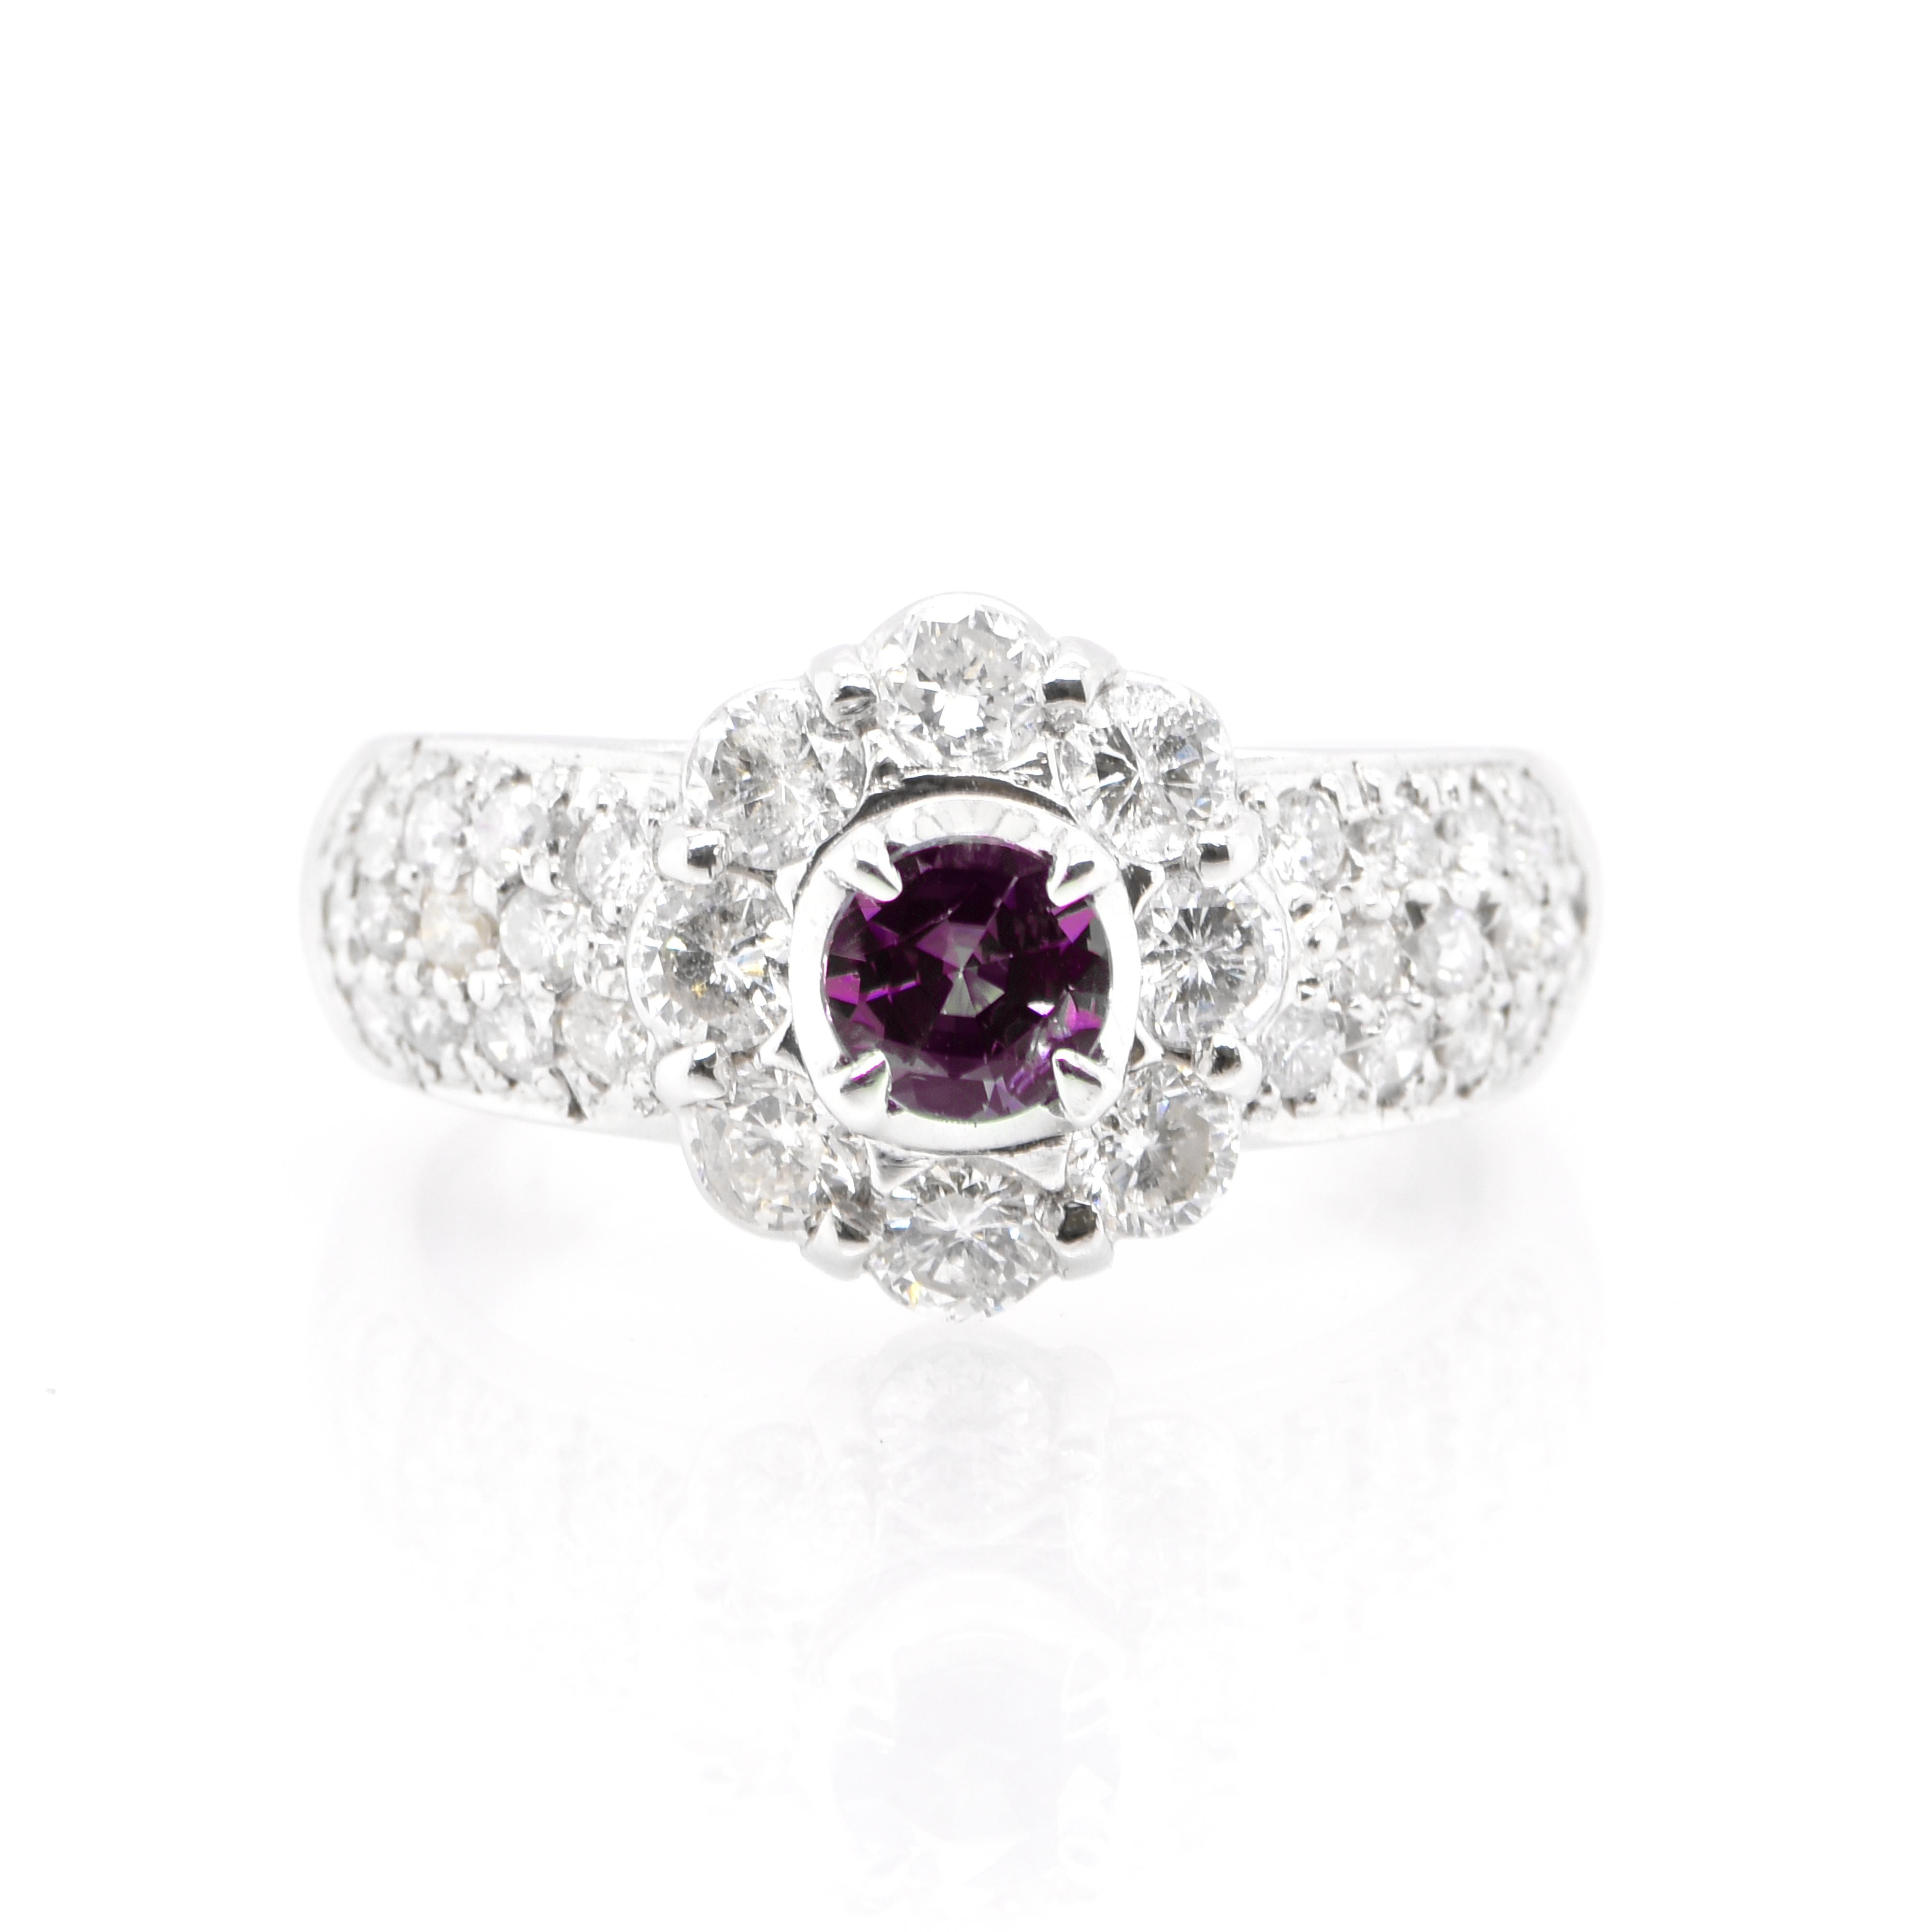 A beautiful 0.35 Carat, Natural, Round Alexandrite Ring with 1.05 Carats of White Round Brilliant Diamond Accents set in Platinum. Alexandrites produce a natural color-change phenomenon as they exhibit a Bluish Green Color under Fluorescent Light